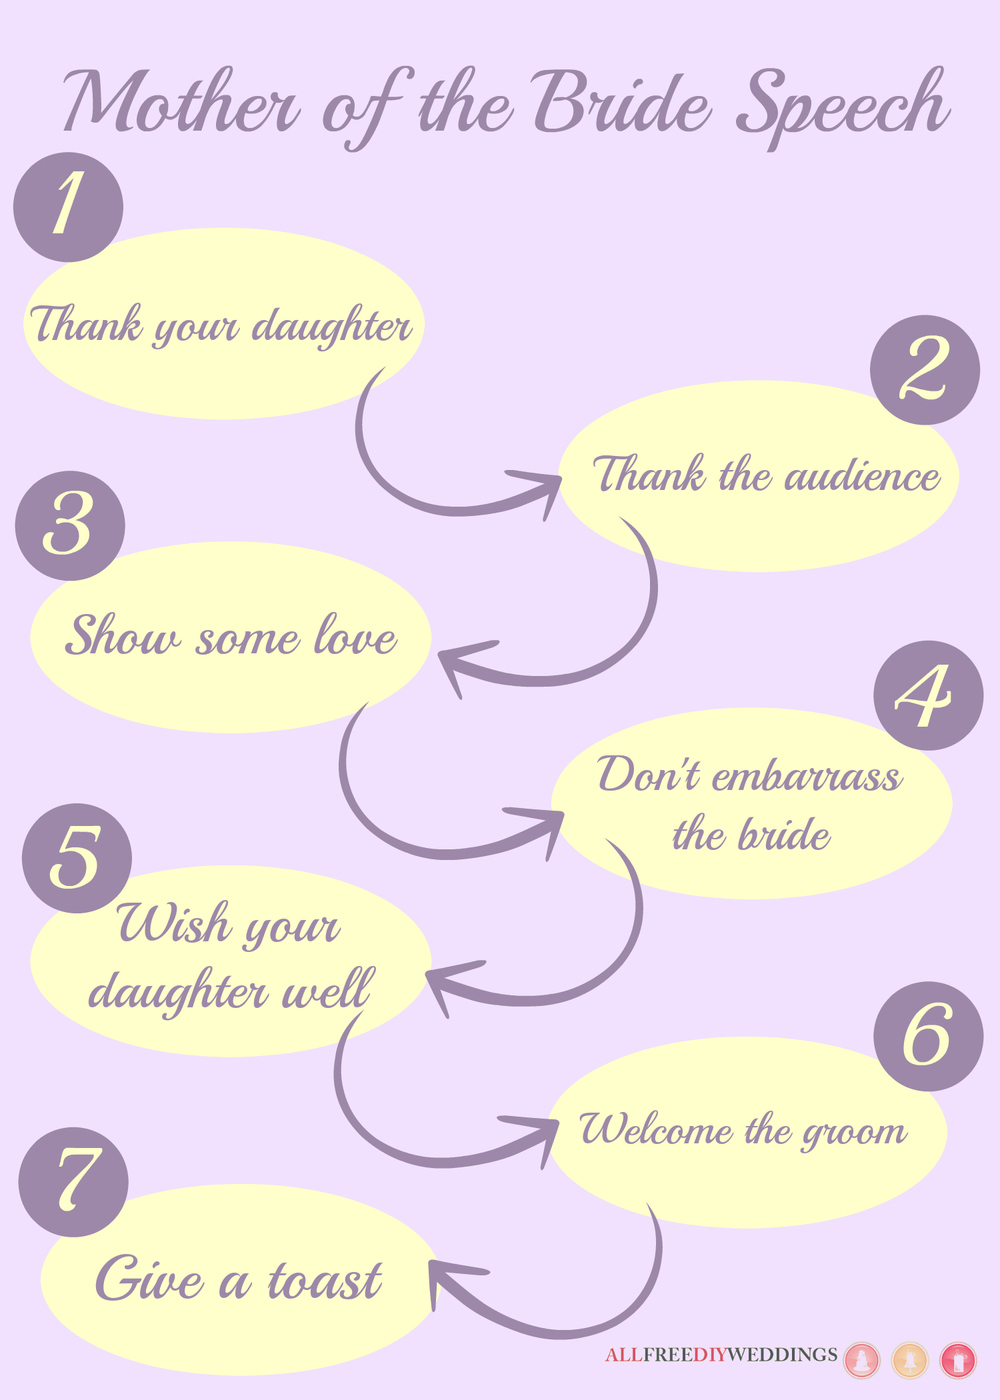 mother-of-the-bride-speech-how-to-write-a-wedding-speech-for-your